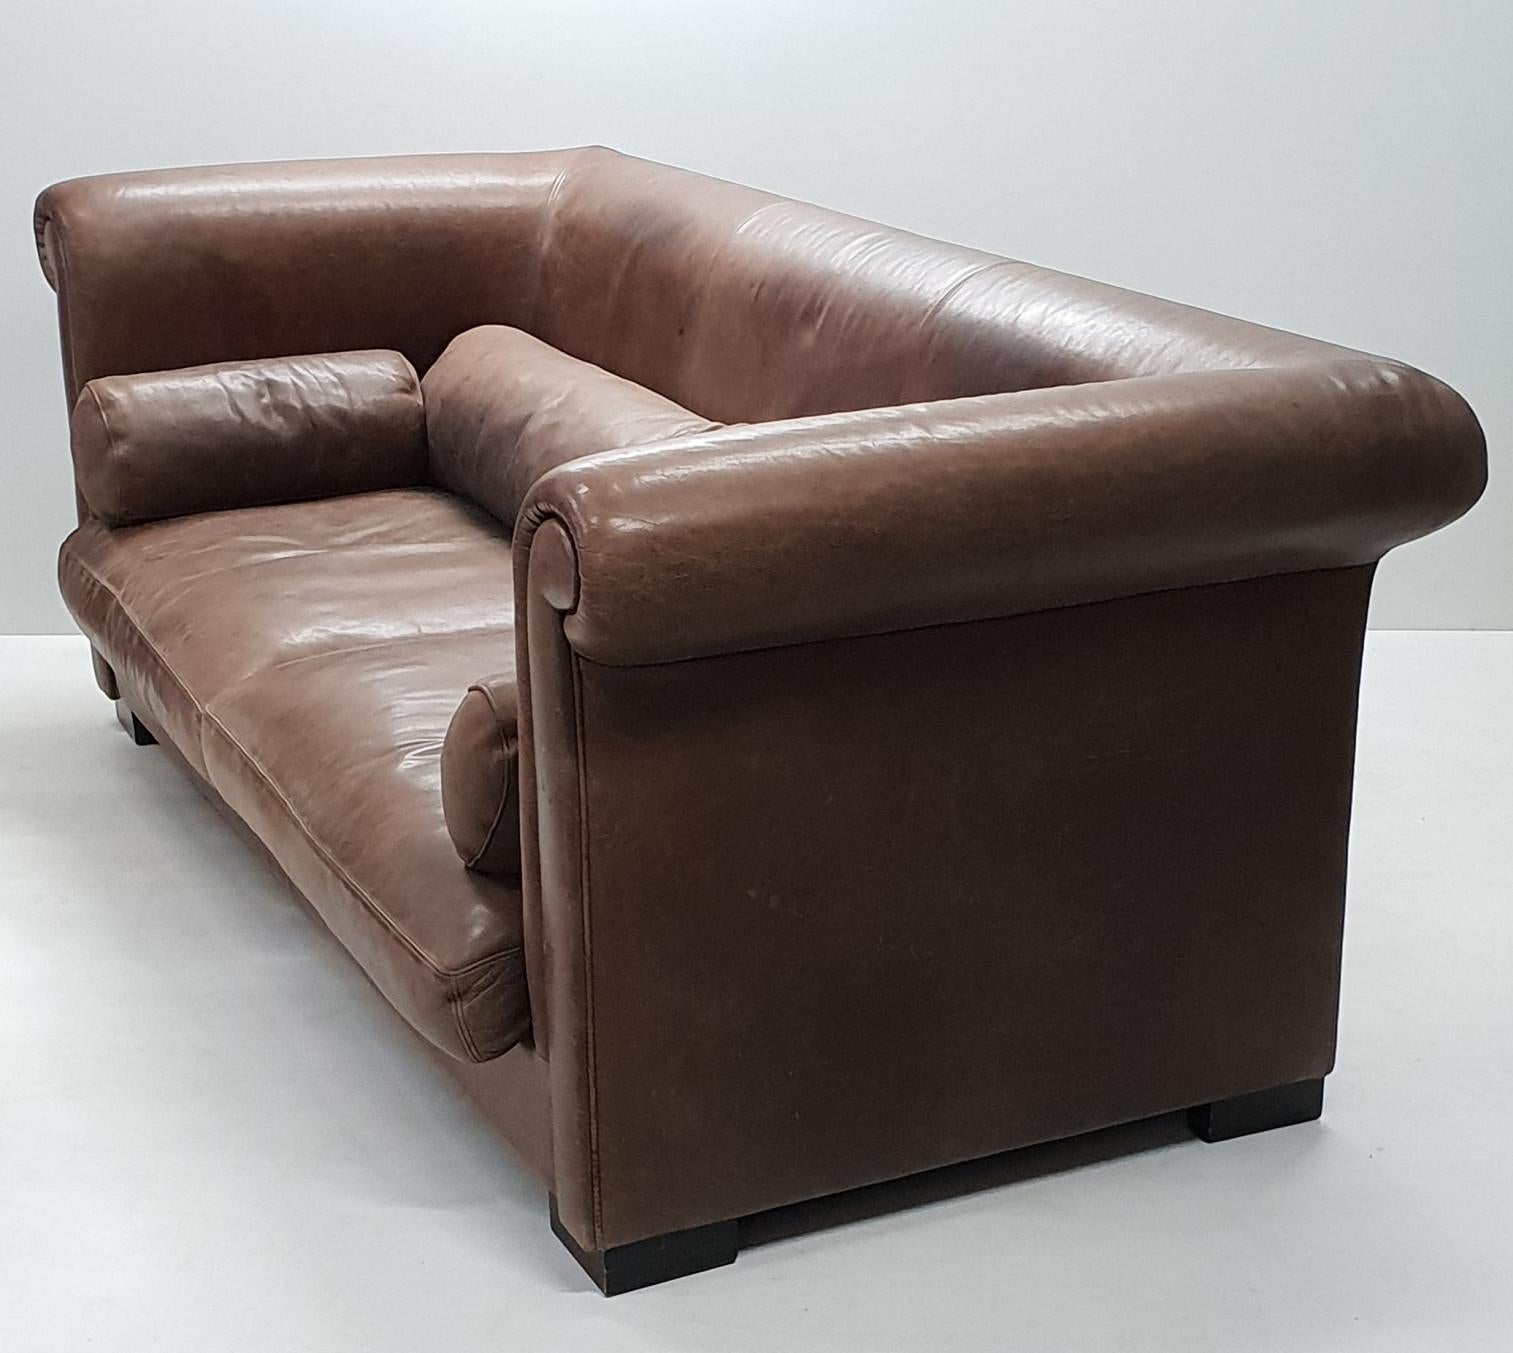 Industrial Brown Leather 3-Seat Sofa Model Alfred P. by Marco Milisich for Bax For Sale 5